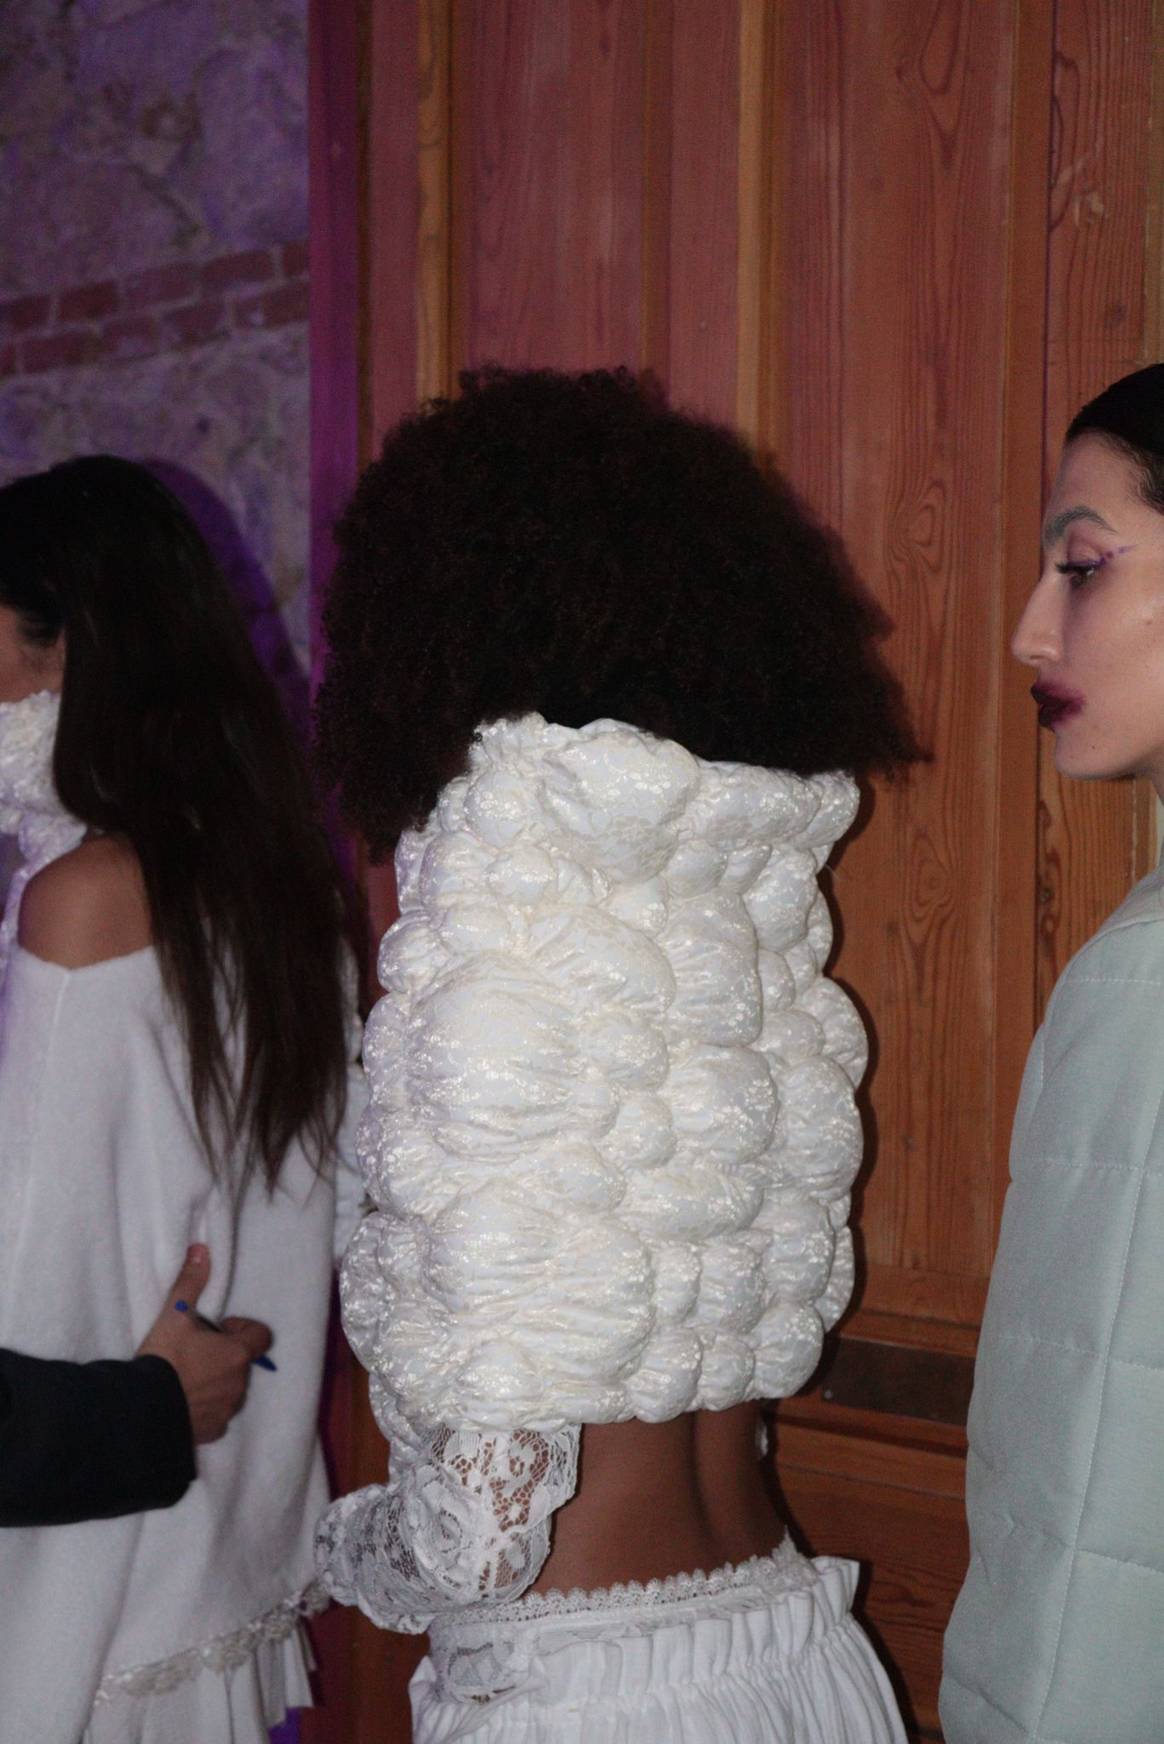 Backstage image of the Paranoia fashion show by ESNE, courtesy of Claudia Pintados Morales. Details of one of her looks.